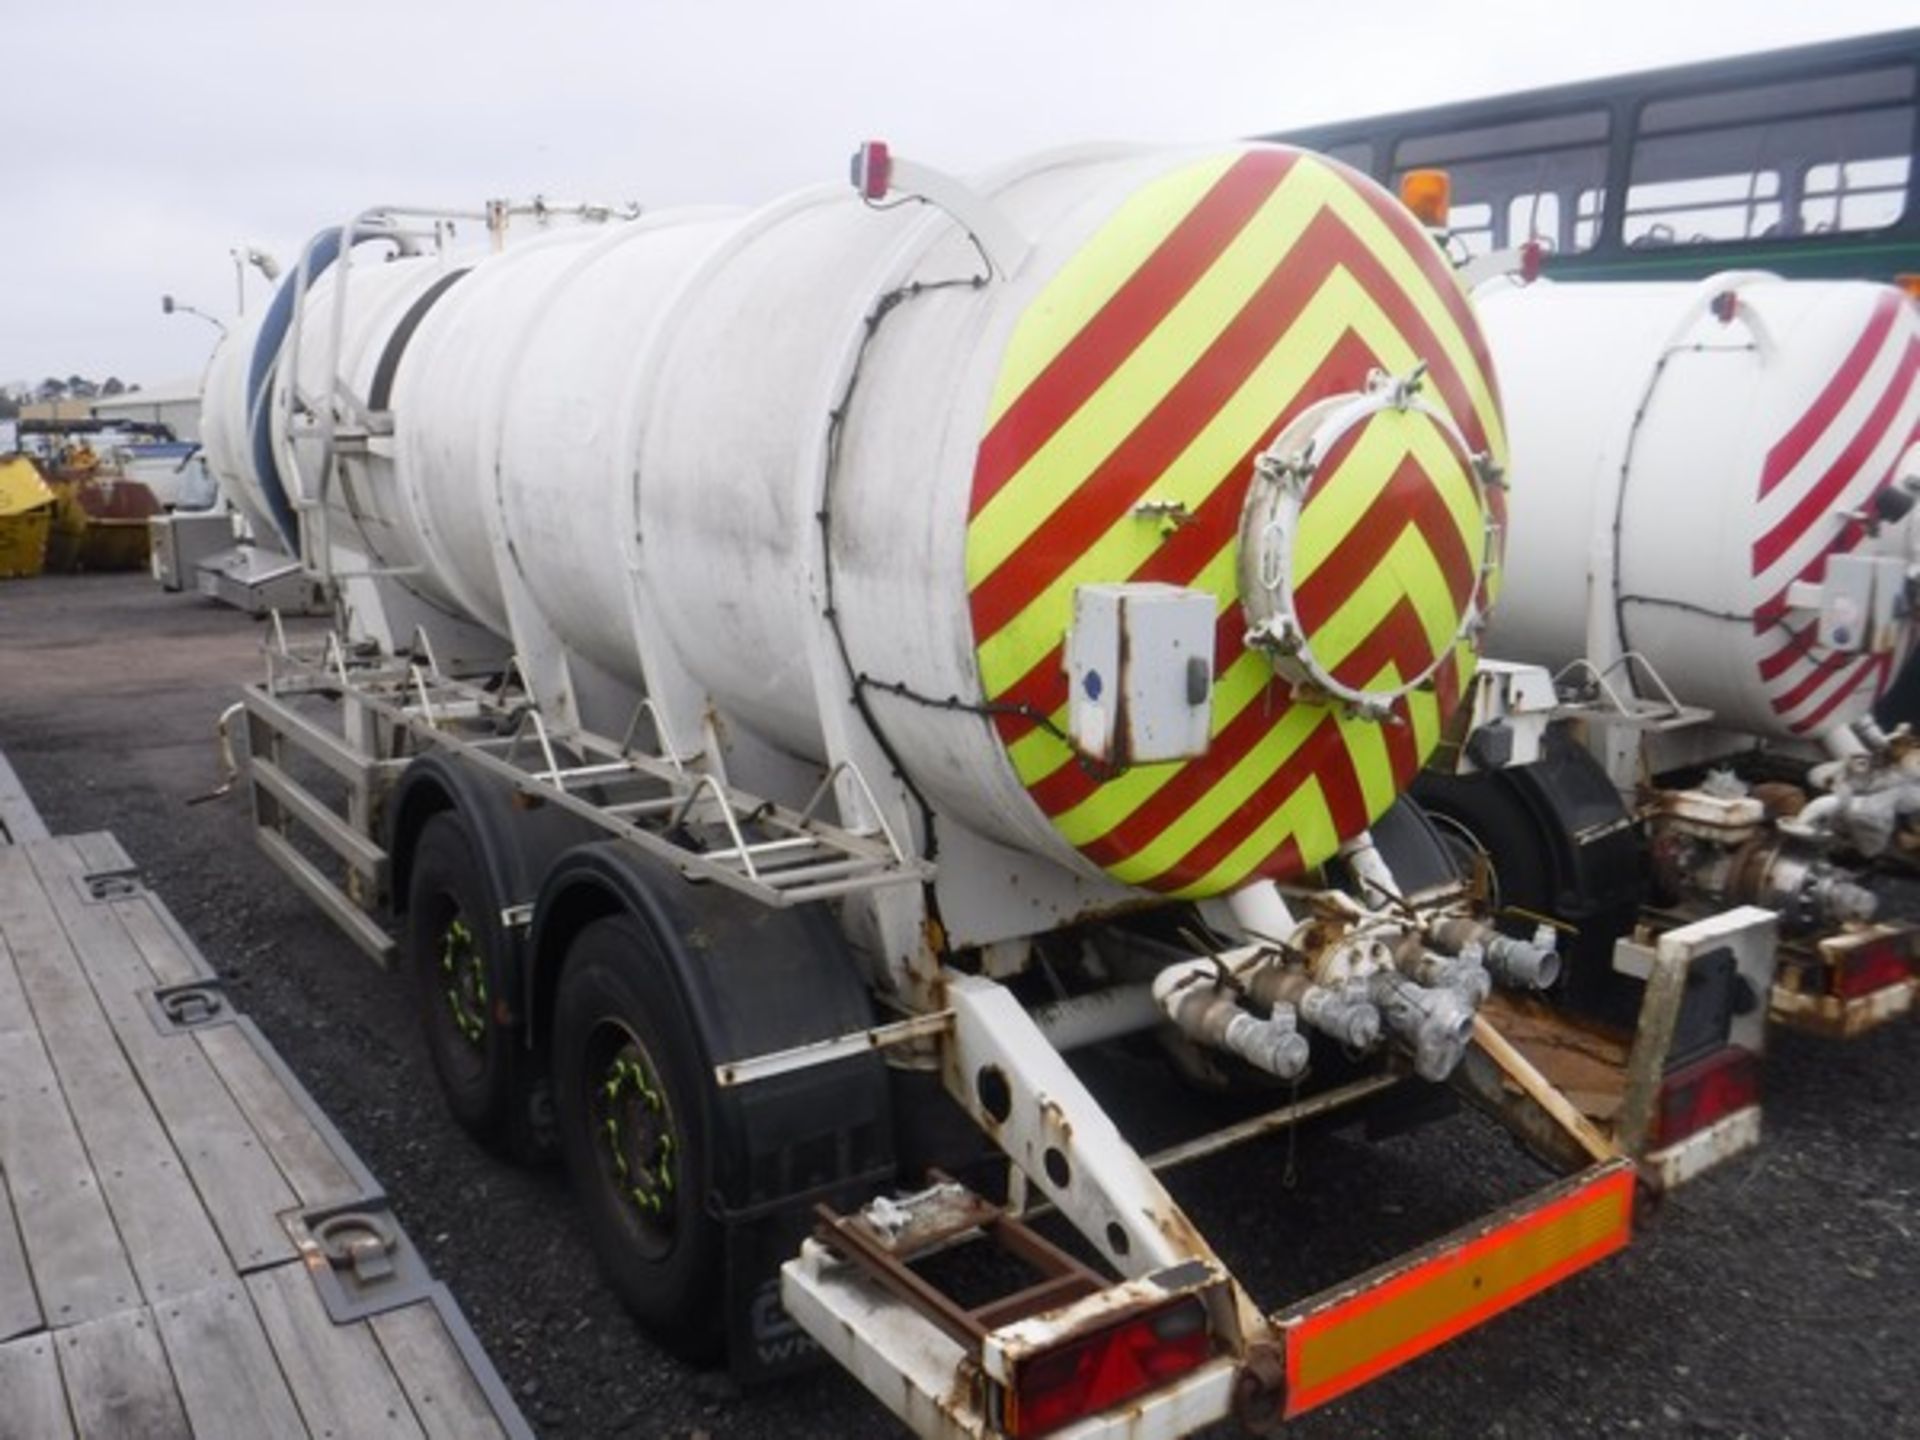 2008 WHALE tanker. 18,000 litre capacity Asset No 2702273. S/N sa 955183280103738 - Image 2 of 5